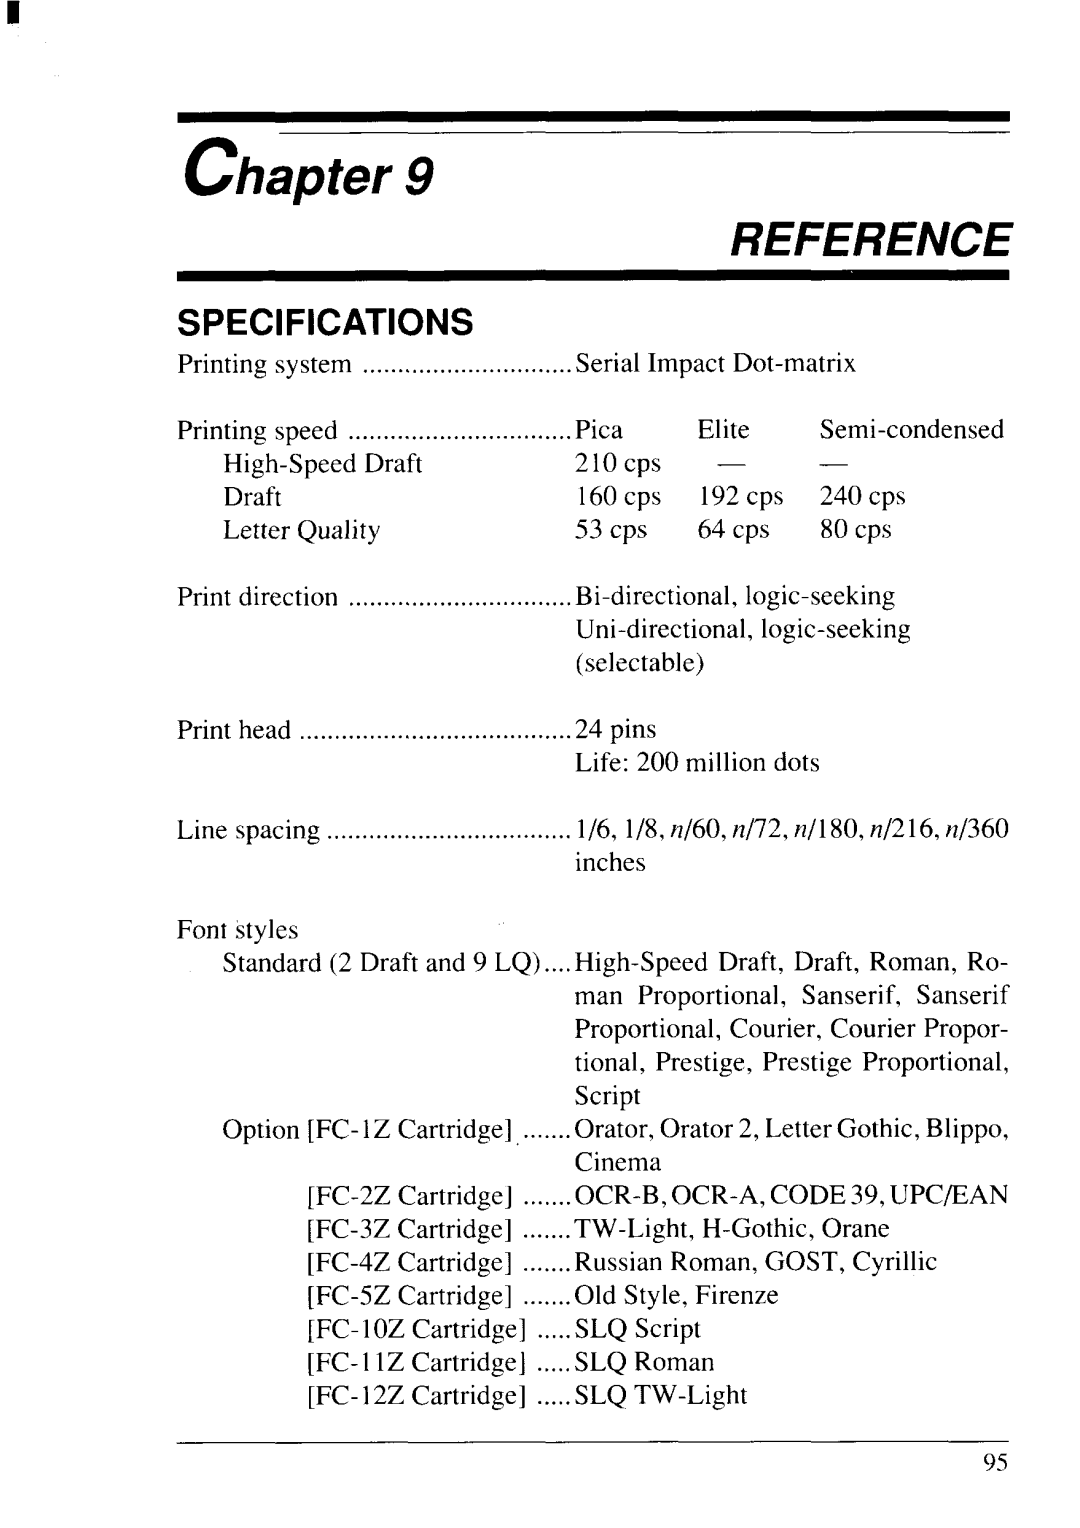 Star Micronics NX-2430 manual Reference, Specifications, chapter 